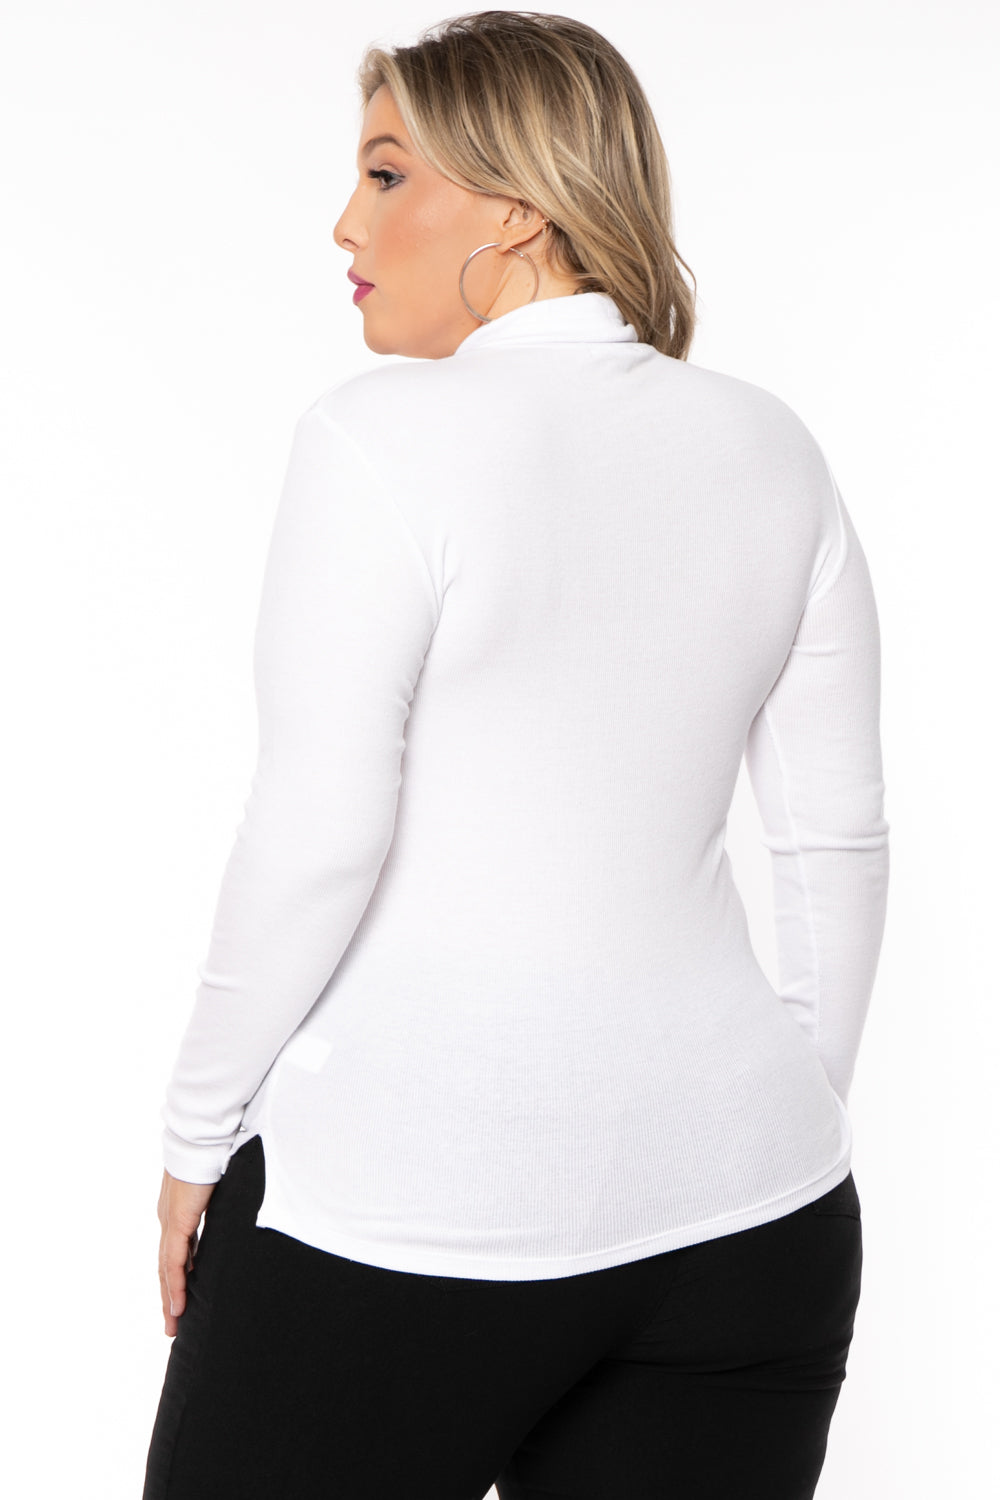 Ambiance Tops Plus Size Ribbed Turtleneck Top - White